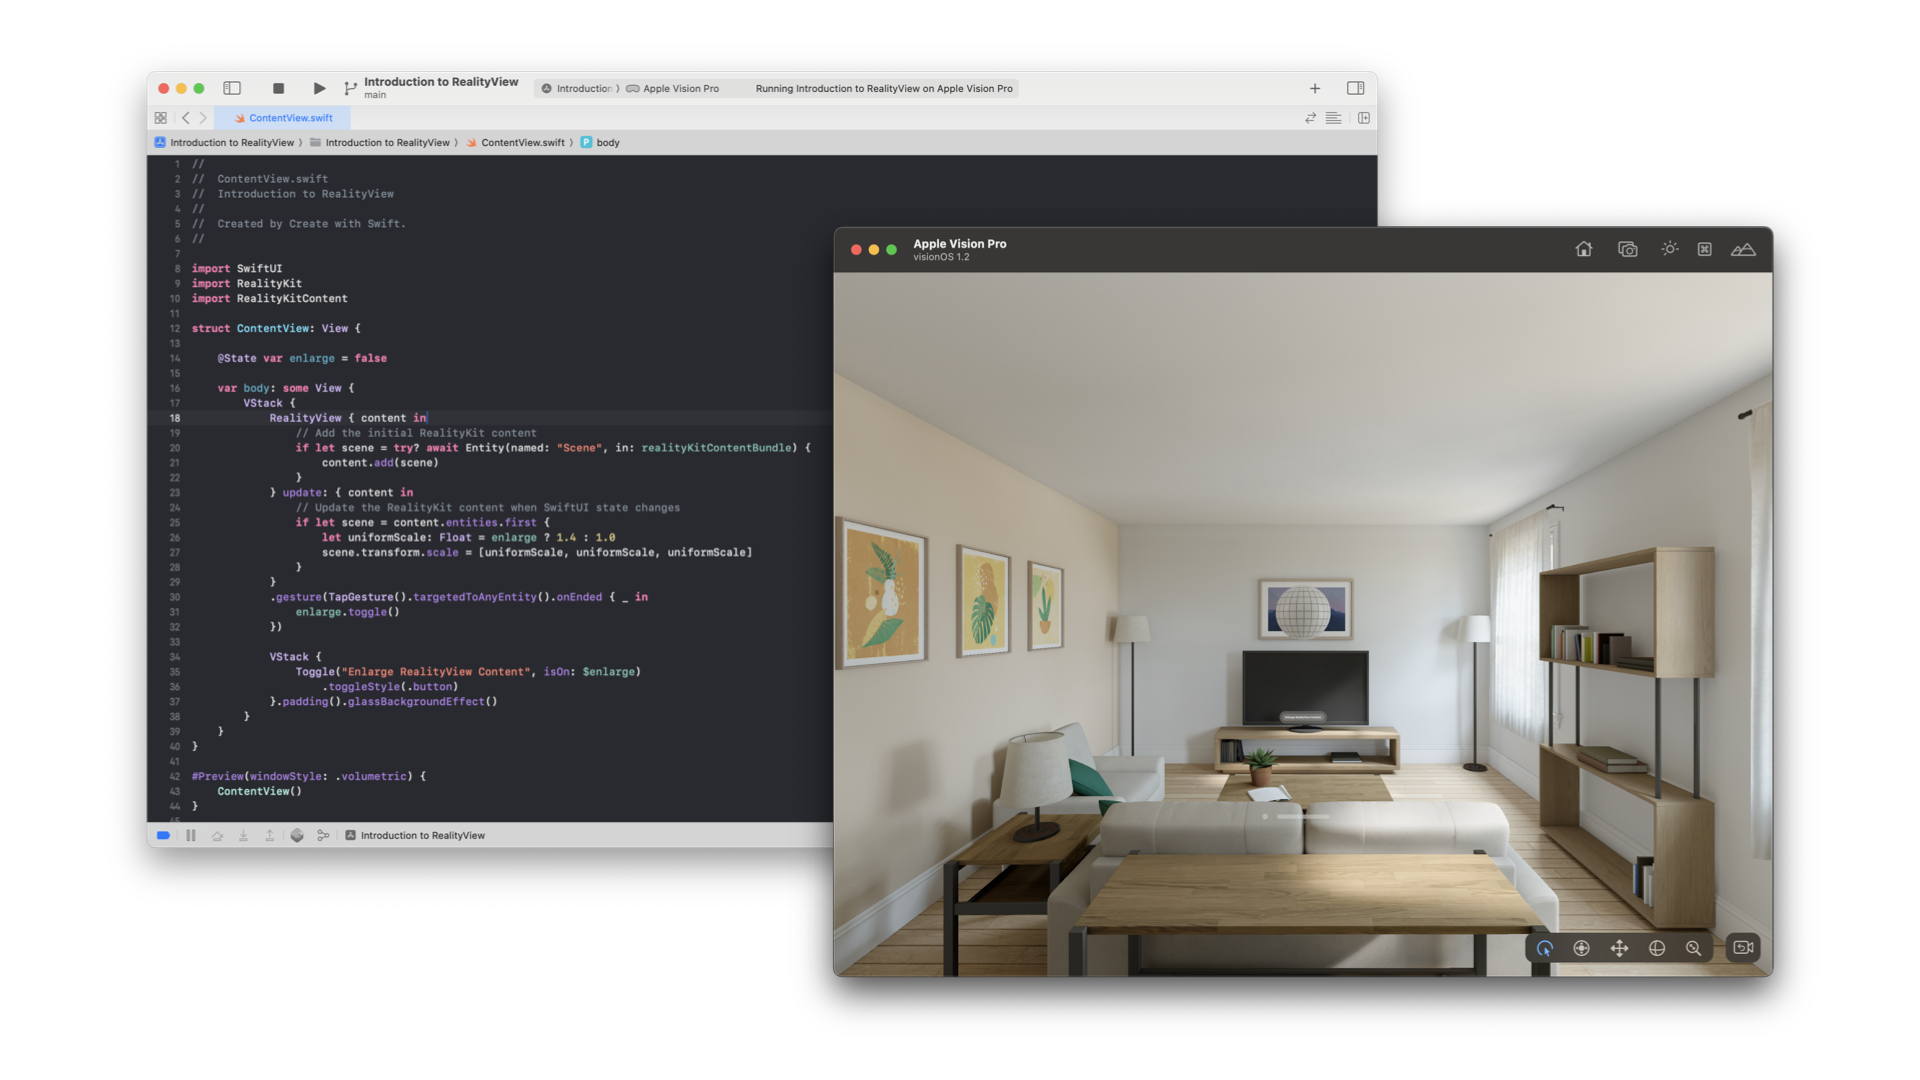 A screenshot of Xcode displaying Swift code for a RealityView project on the left, and on the right, a preview of a 3D-rendered living room seen through the Apple Vision Pro simulator. The code window shows the implementation of a RealityView in the ContentView.